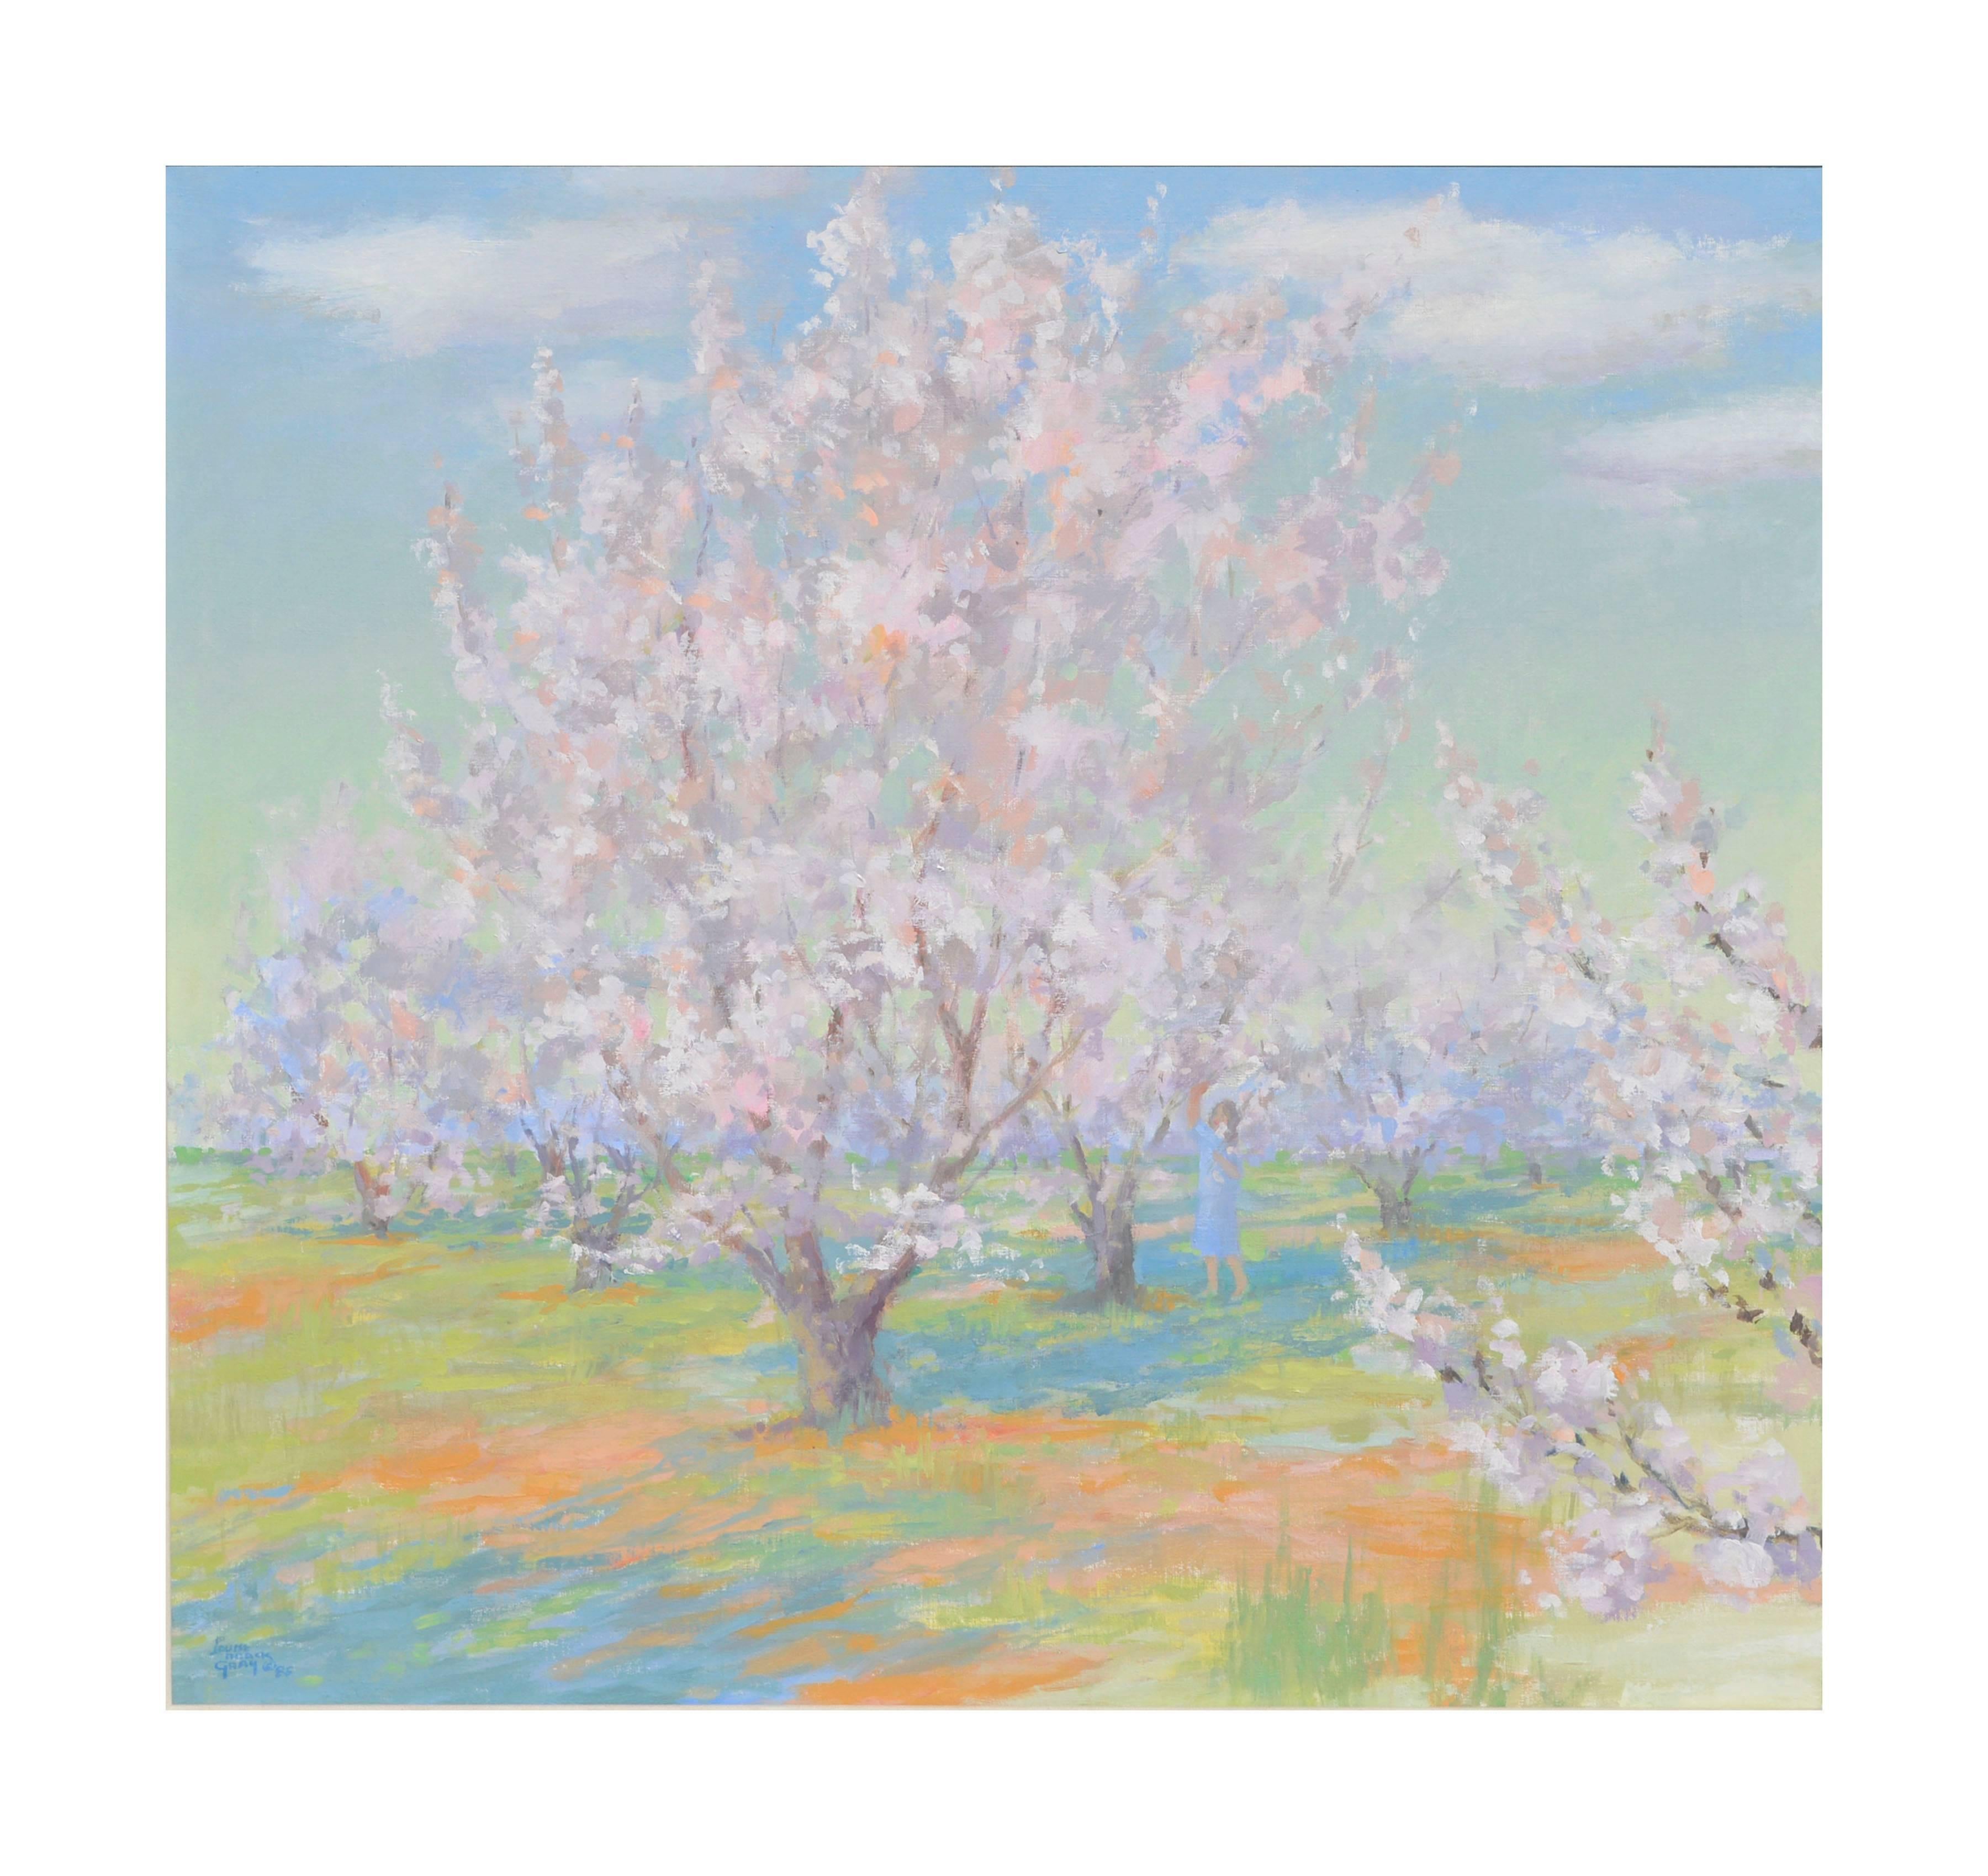 Gathering Blossoms - Painting by Louise Noack Gray